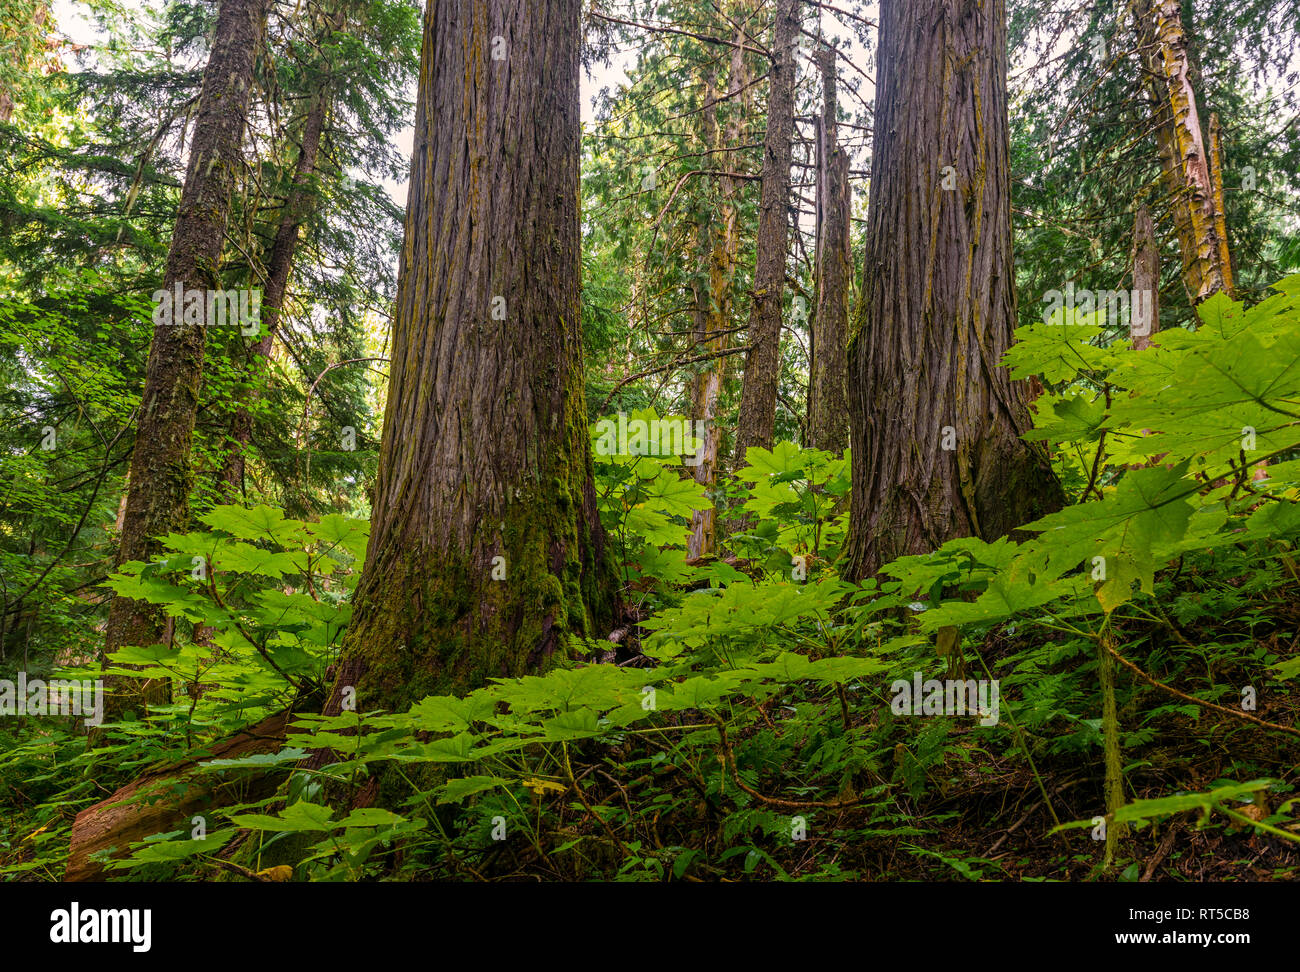 Cedar trees and ferns inside the Ancient Forest, only inland rainforest in the world, Fraser River Valley, Prince George, British Columbia, Canada. Stock Photo